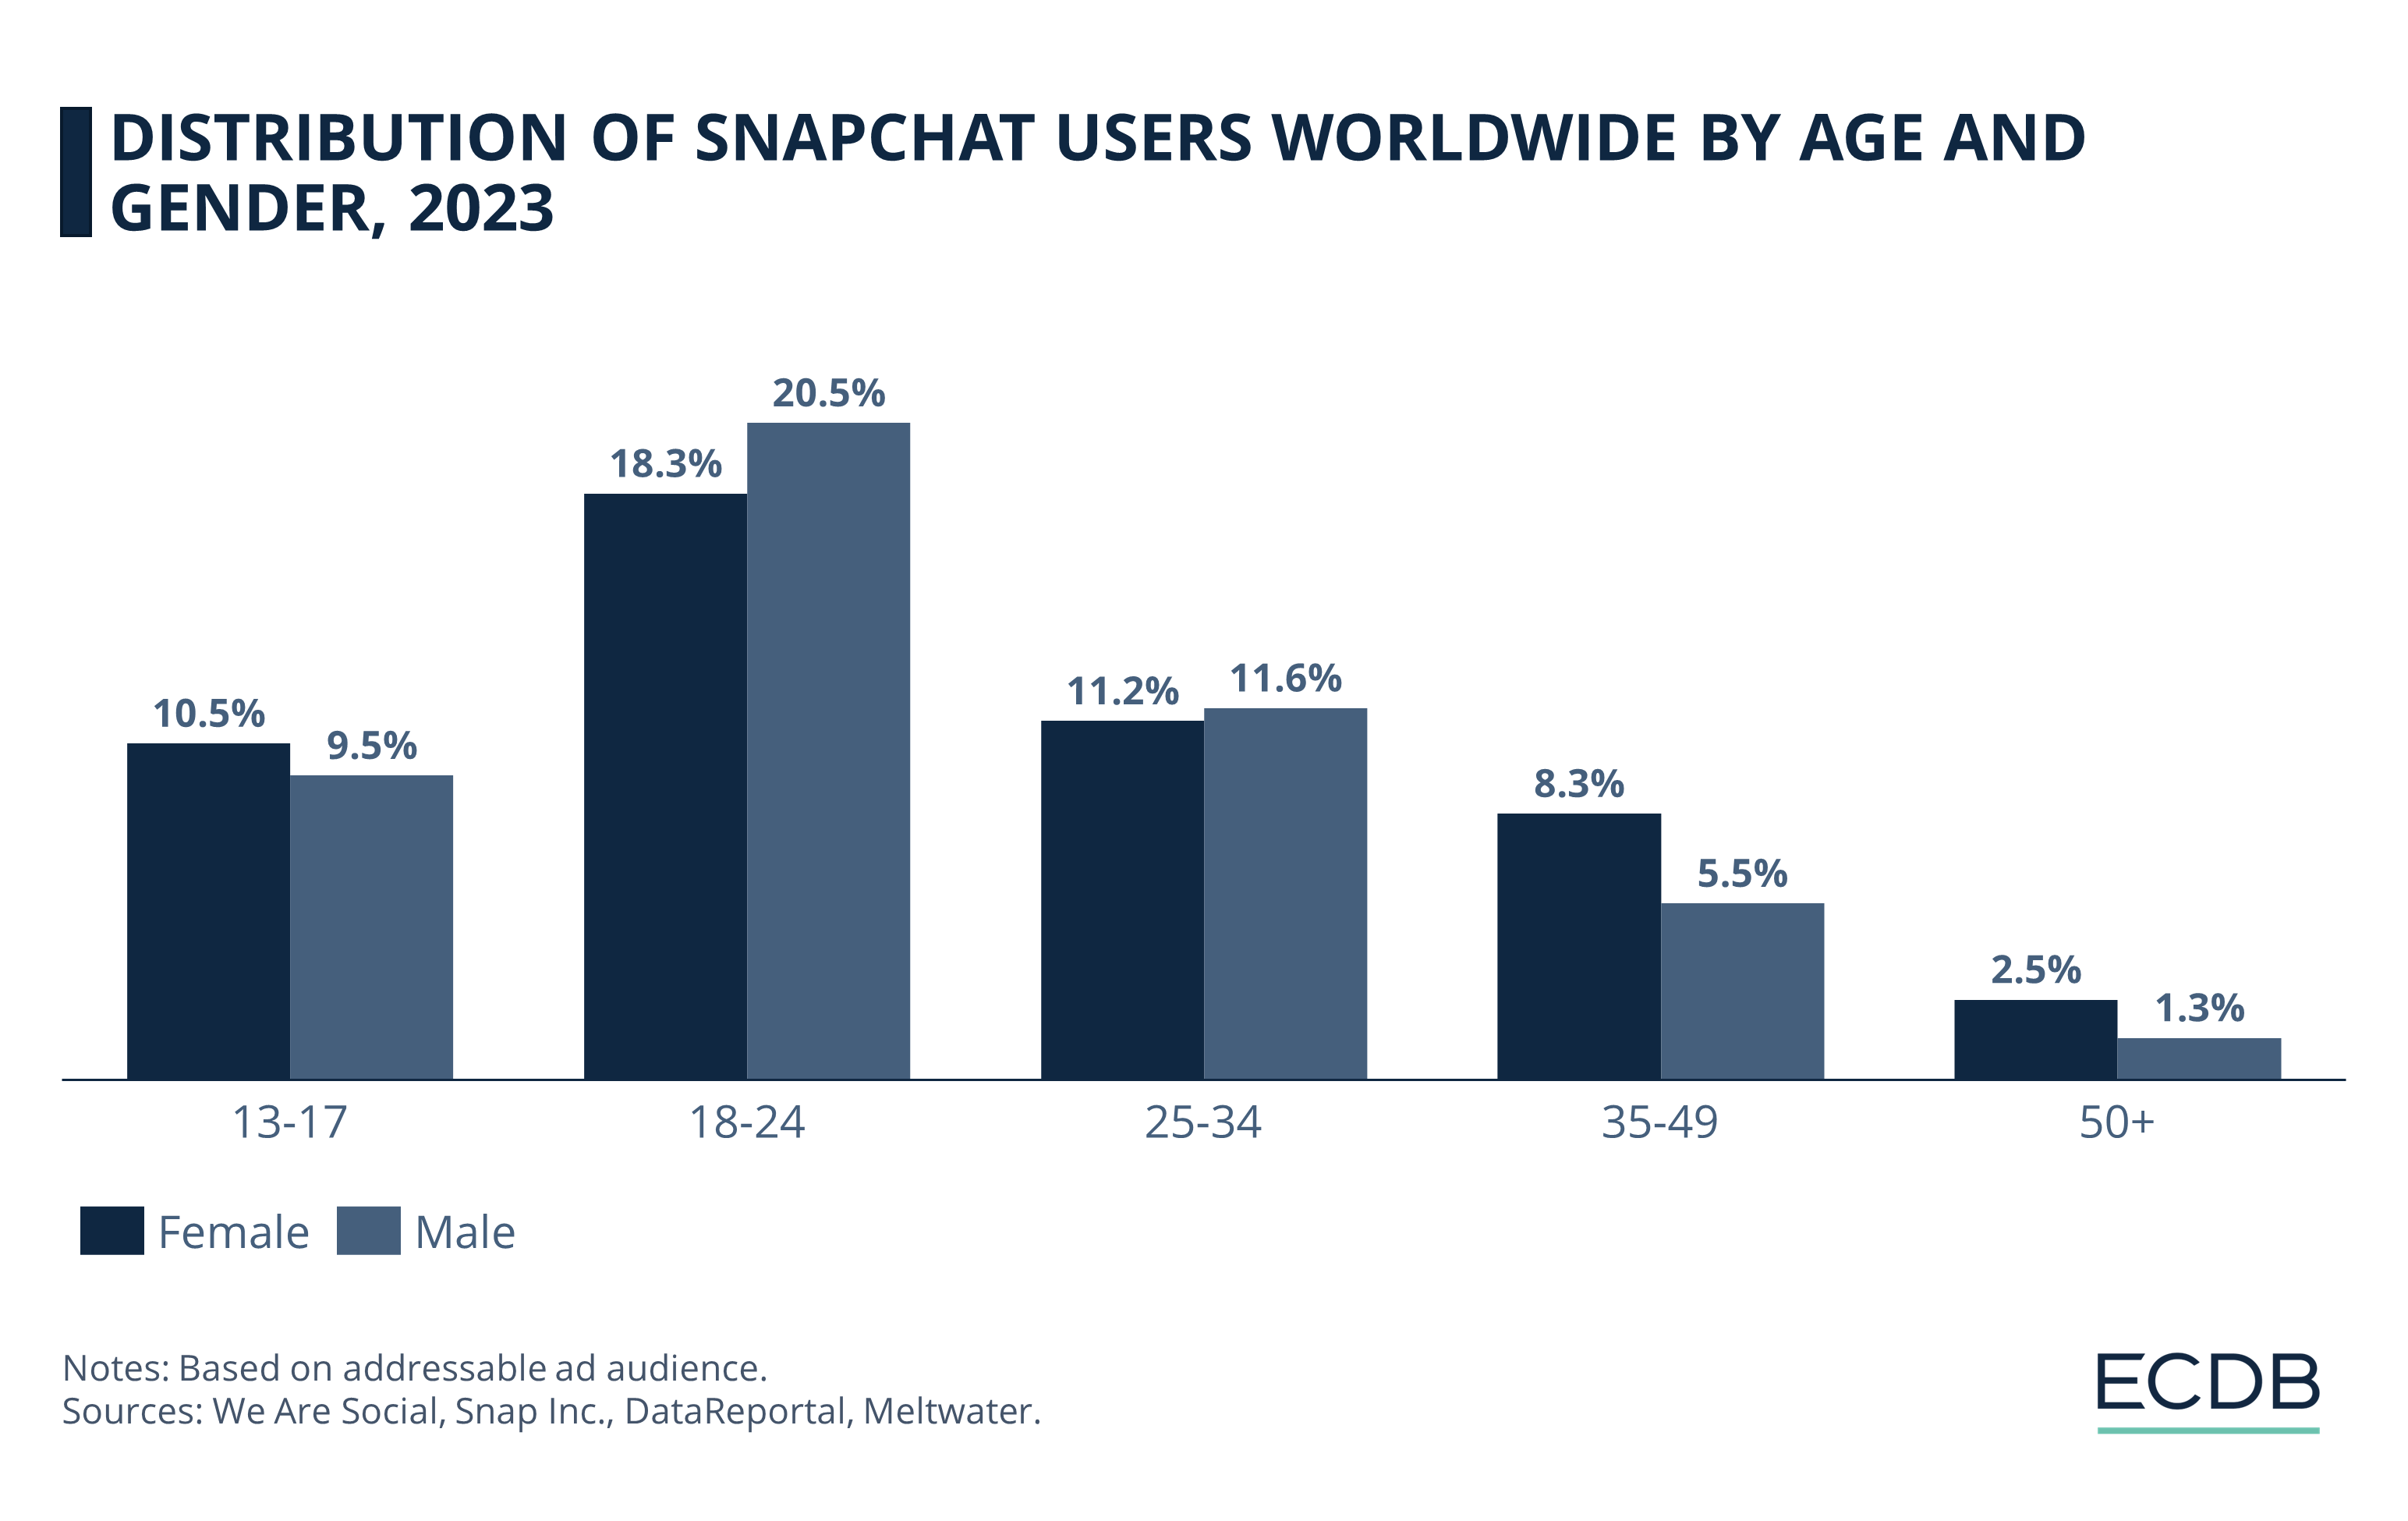 Distribution of Snapchat Users Worldwide by Age and Gender, 2023